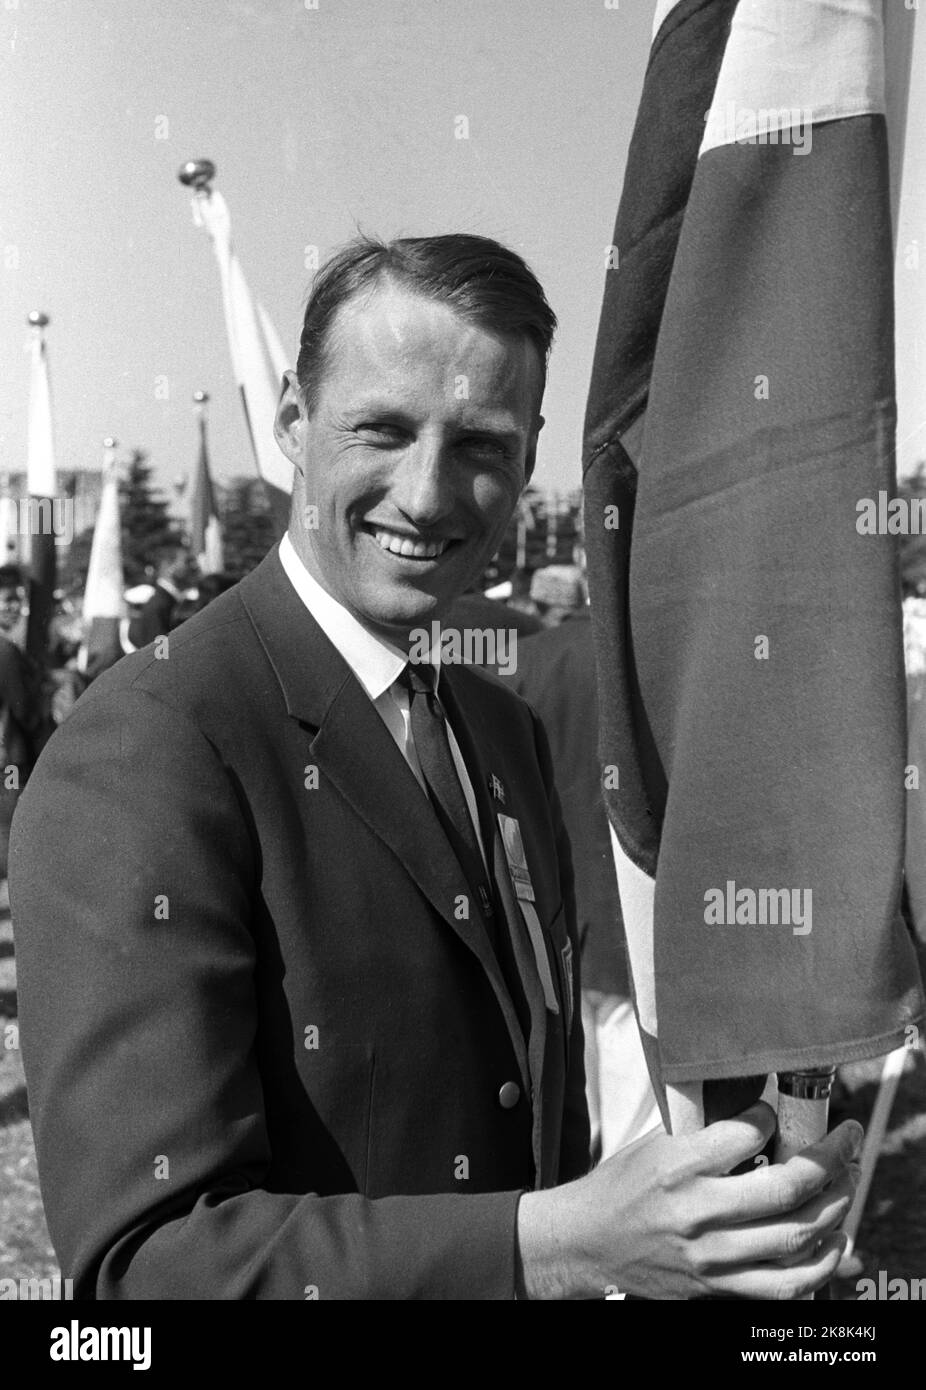 Tokyo, Japan 1964. Summer Olympics in Tokyo. Crown Prince Harald is the flag bearer for the Norwegian squad during the opening ceremony. The Crown Prince participates in the Olympic team in sailing. Ntb archive photo / ntb Stock Photo